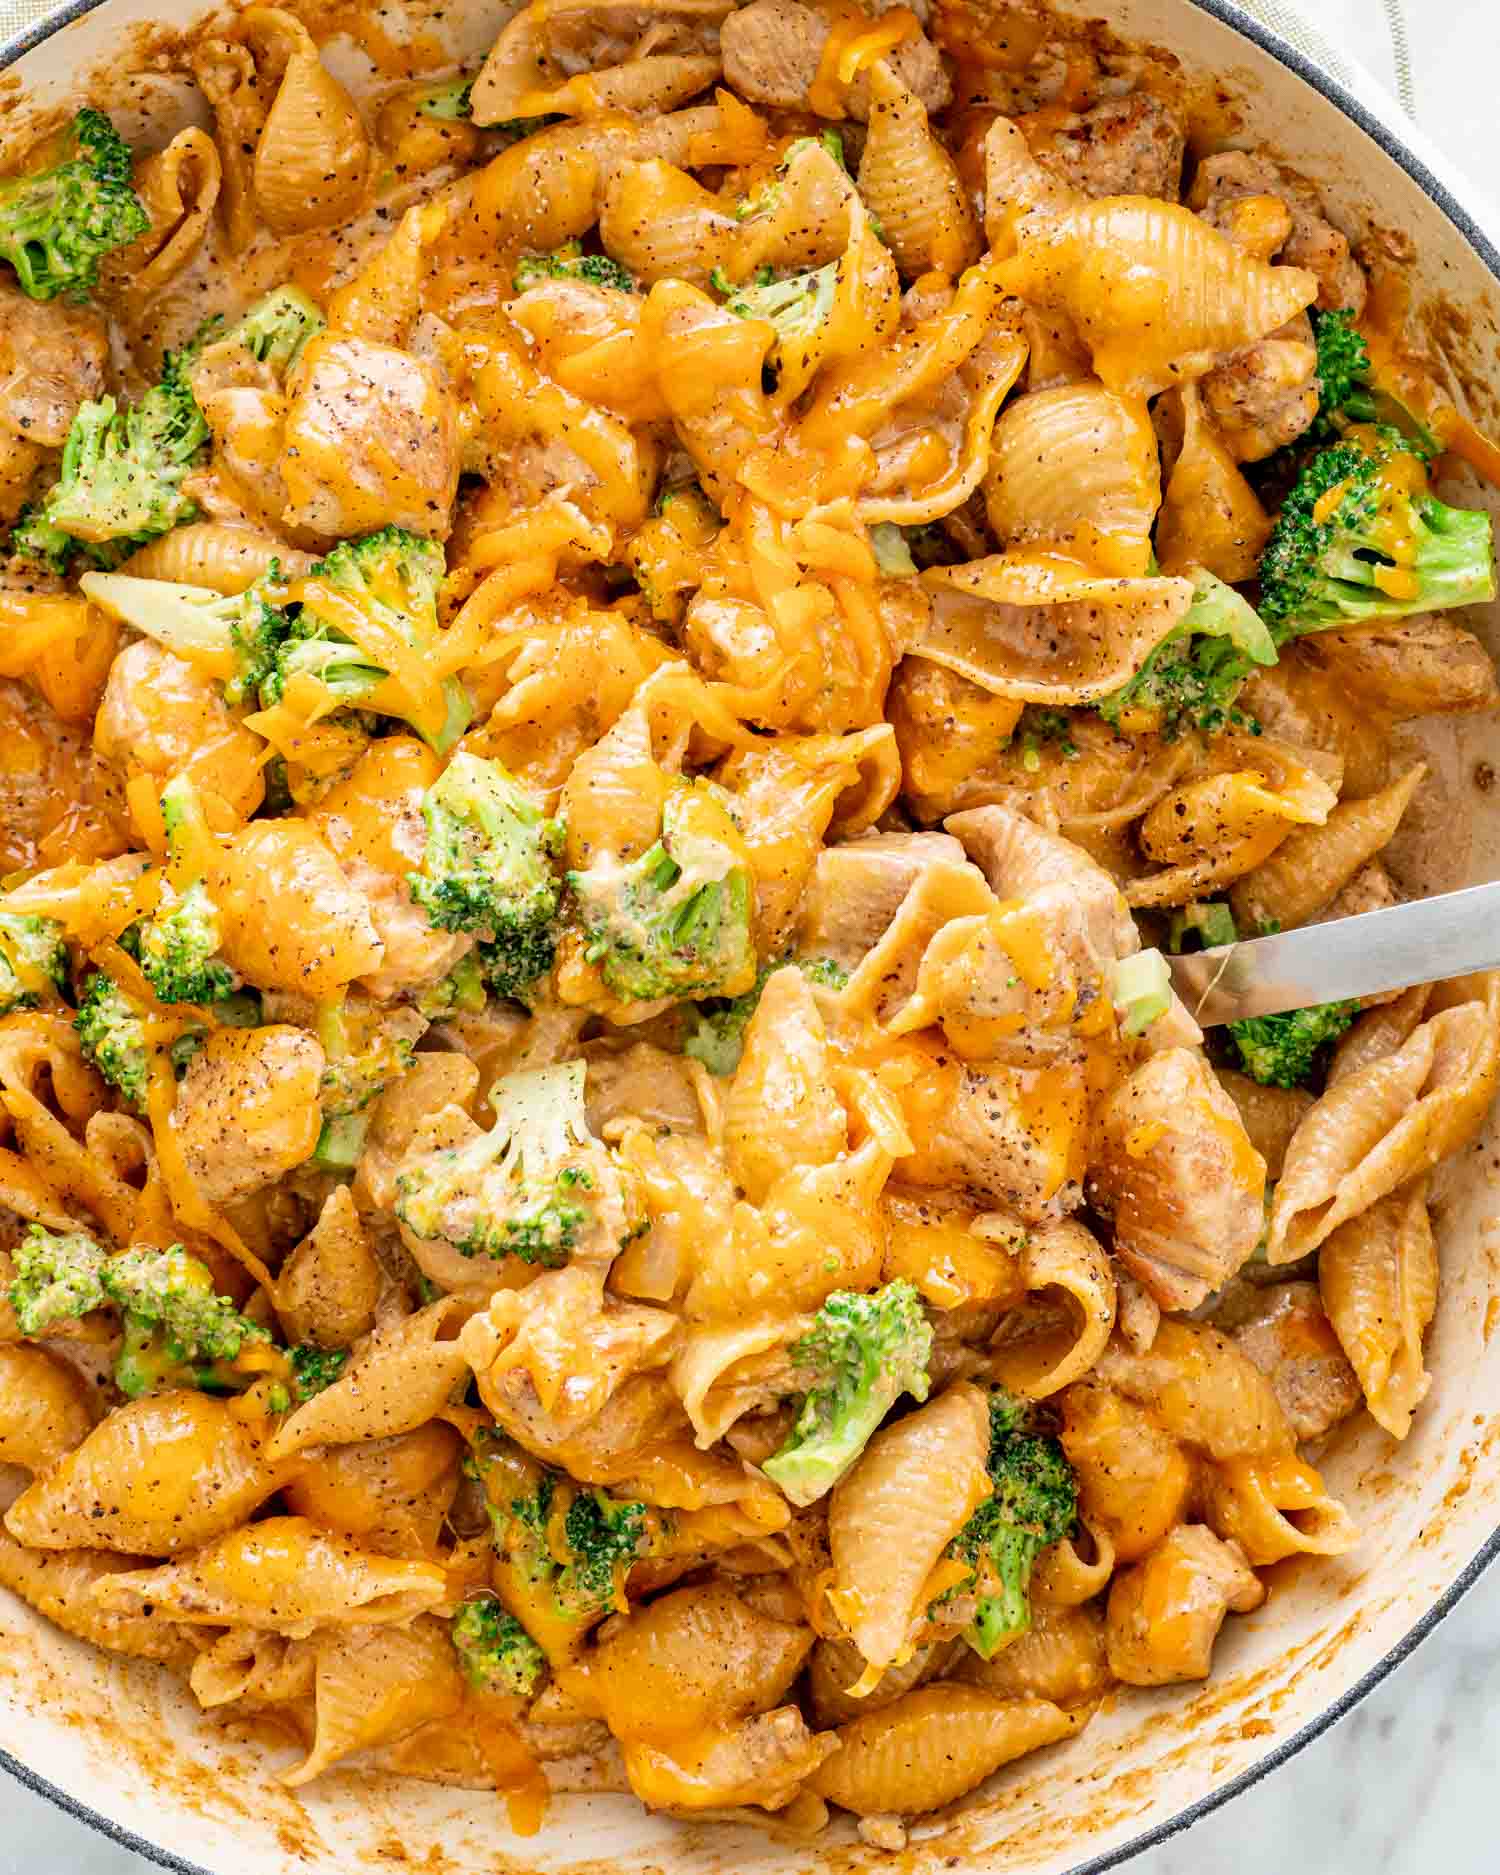 cheesy chicken broccoli pasta in a skillet freshly made.